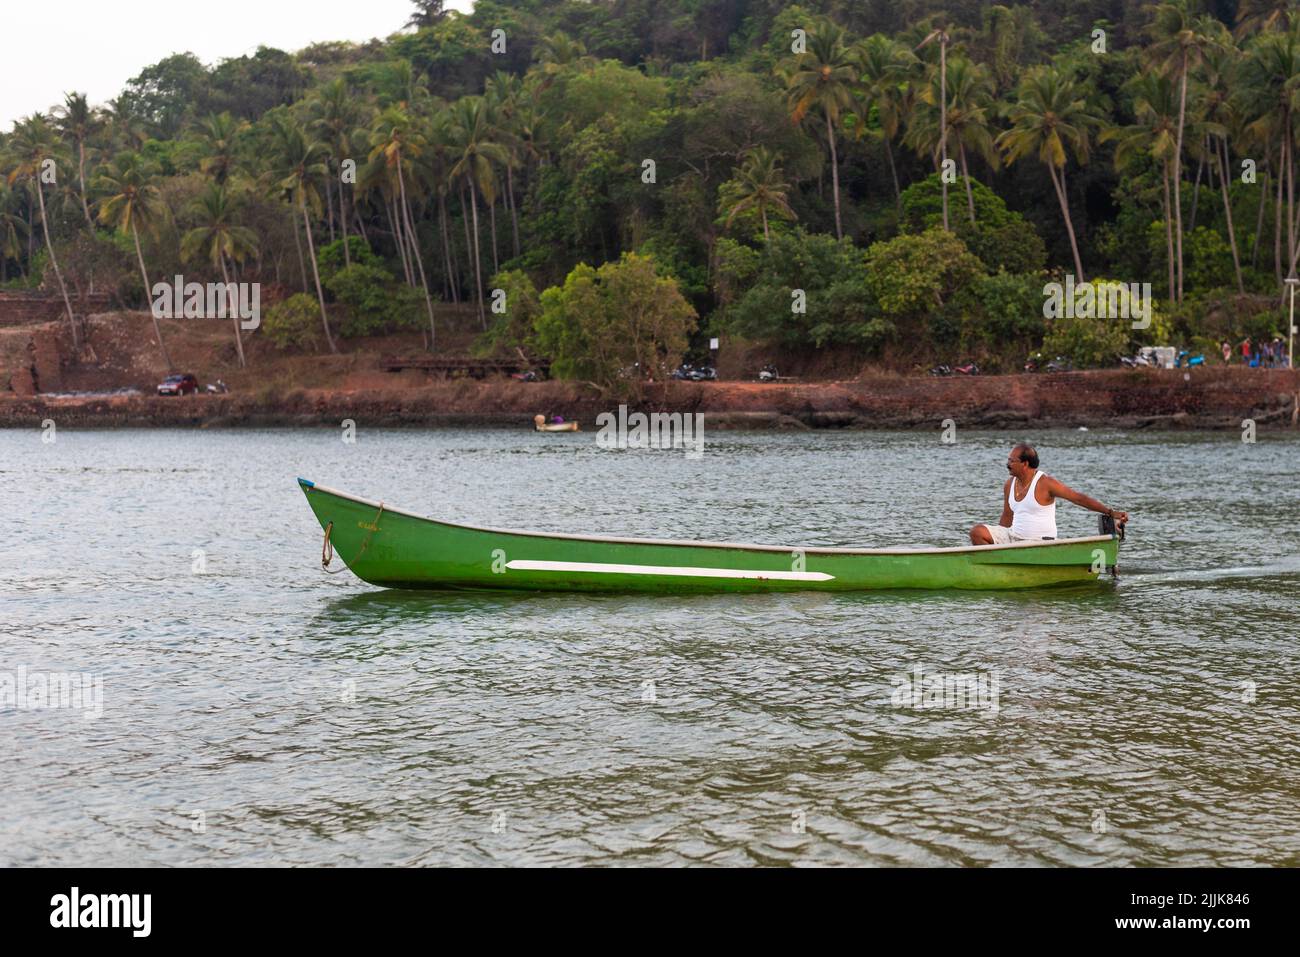 A local Indian fisherman in a boat in the village of Betul, Salcete, Goa, India Stock Photo